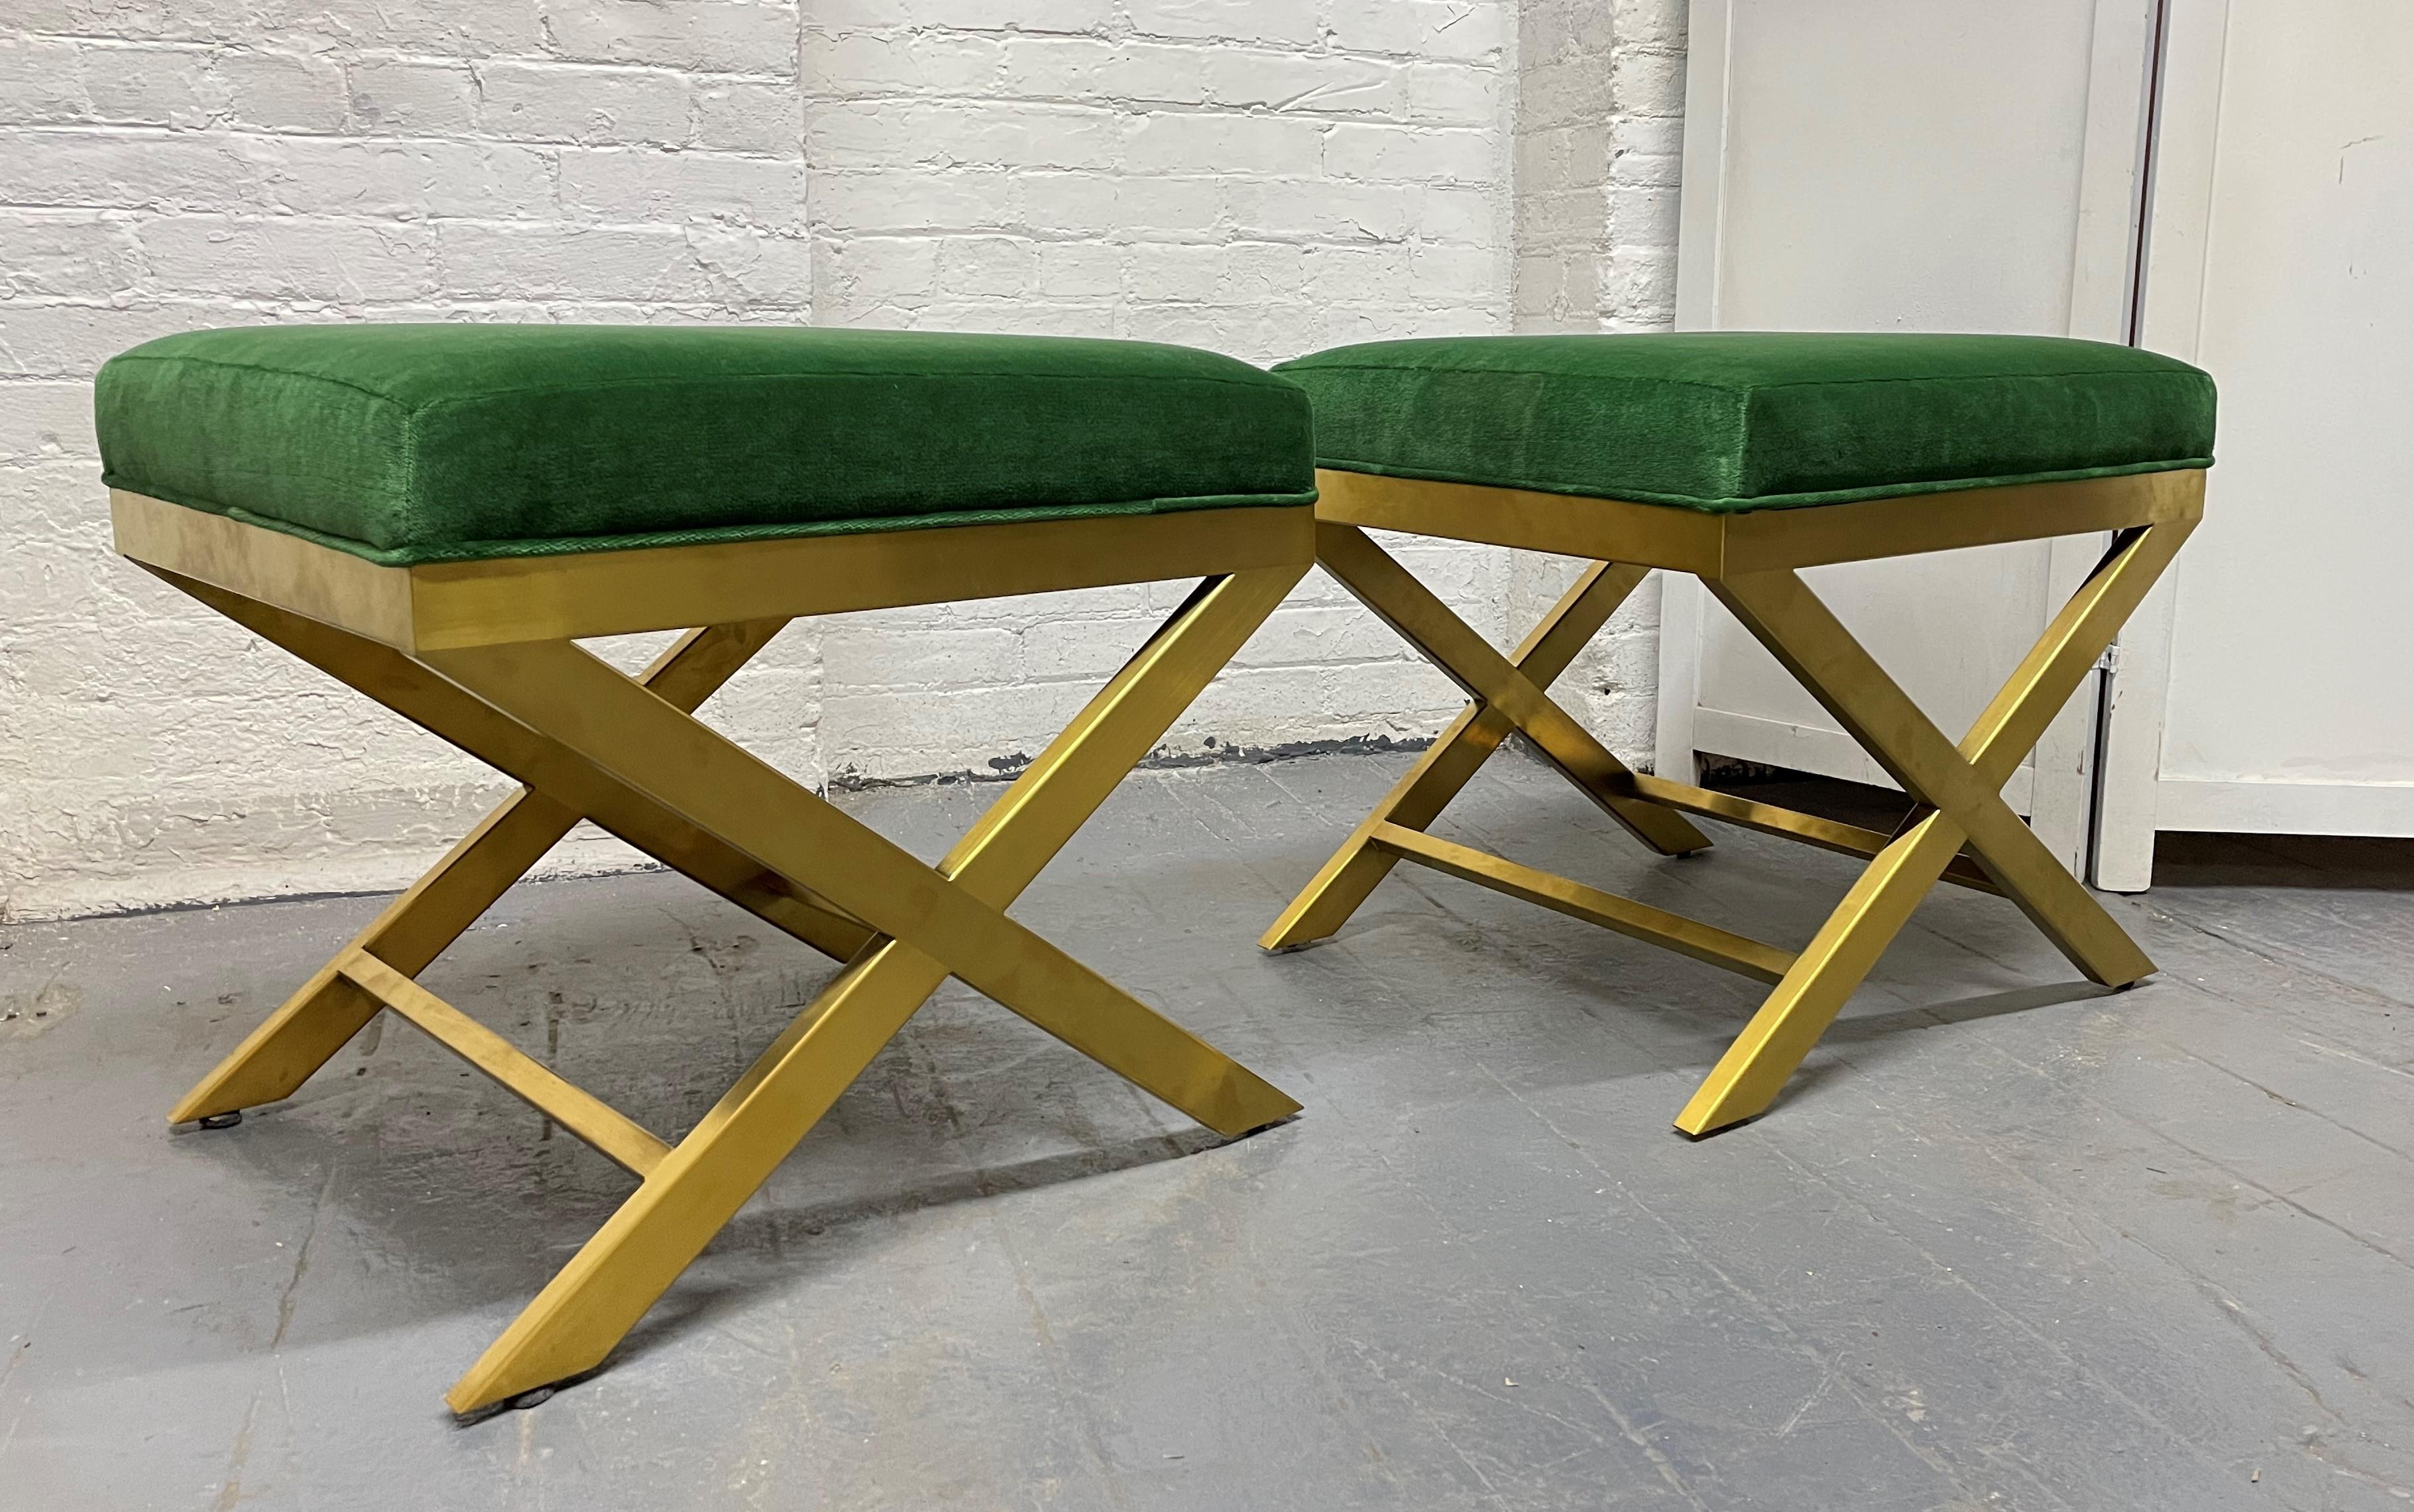 Pair of upholstered velvet and brass X-benches. The benches have brass frames and green velvet upholstery.